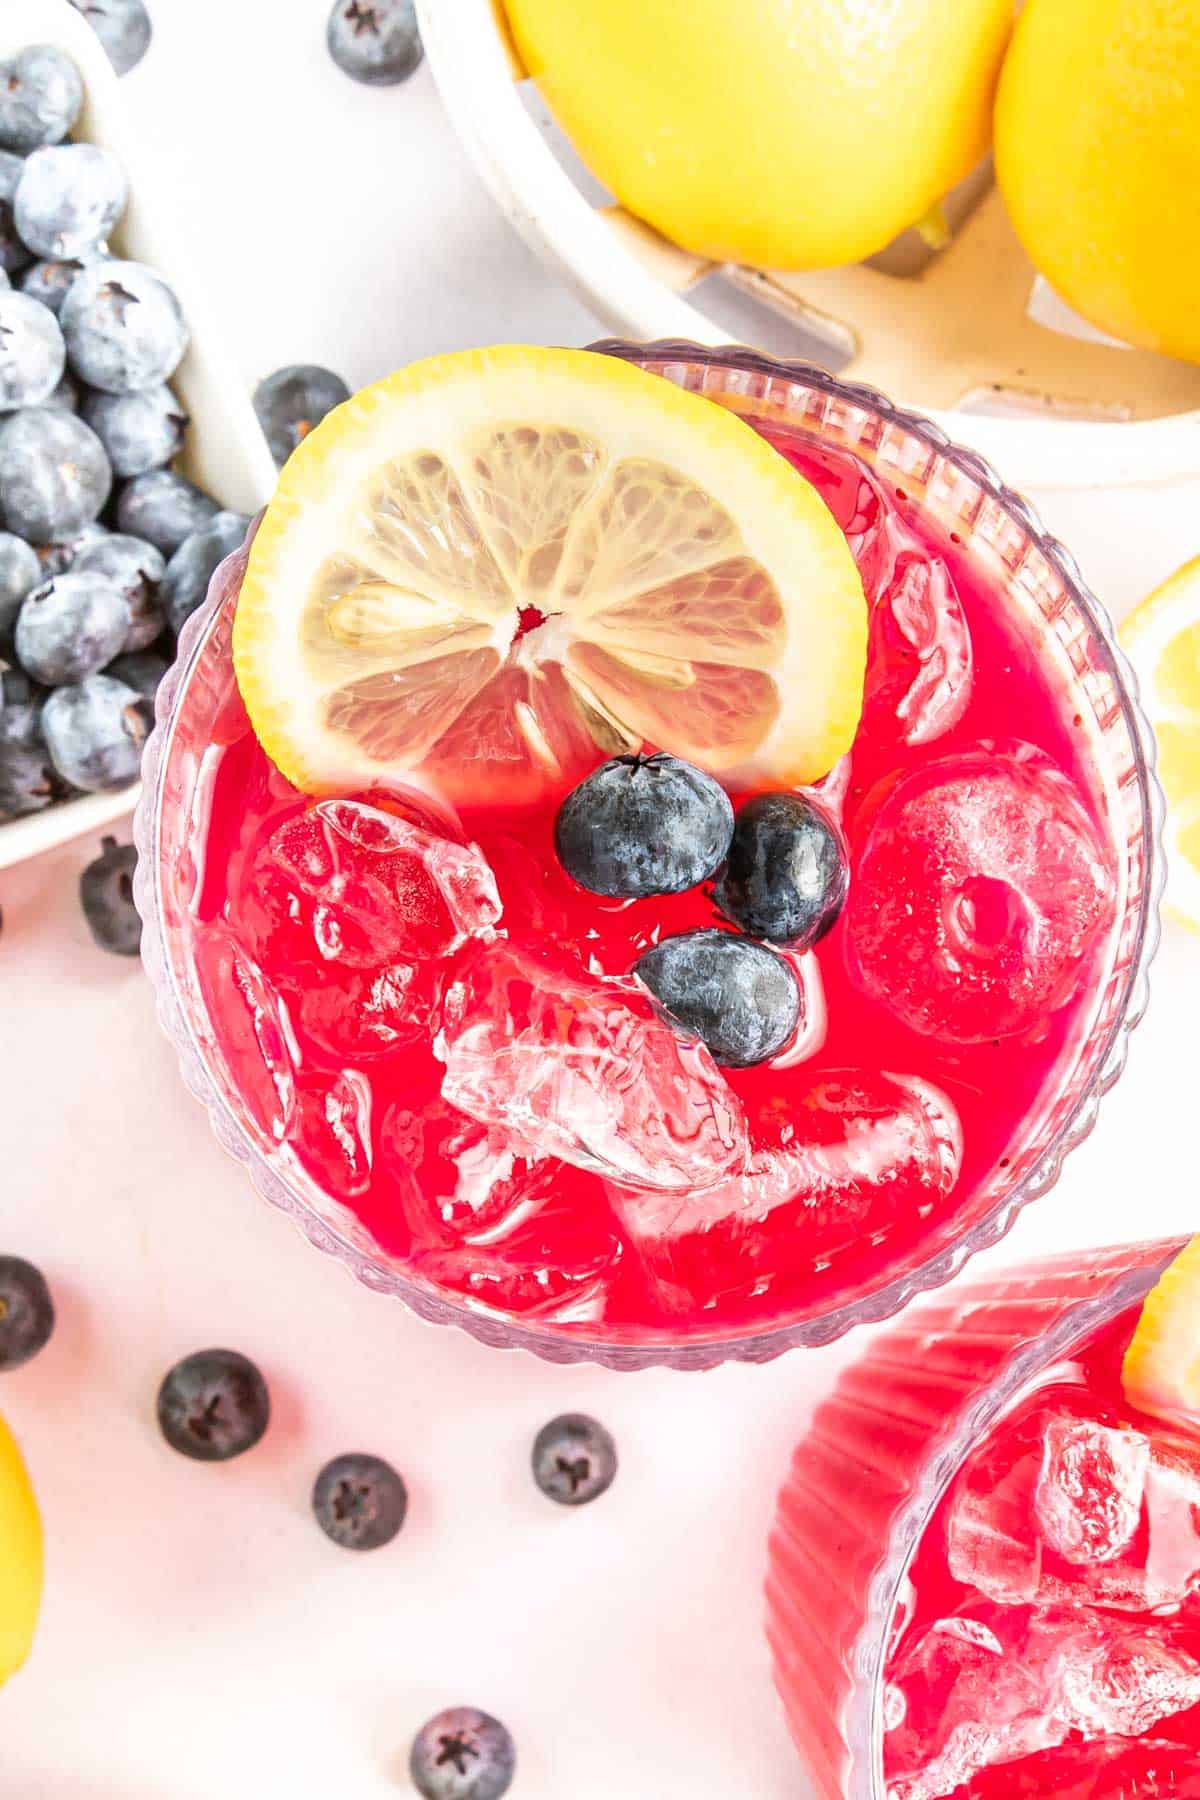 Overhead view of a glass of blueberry lemonade garnished with blueberries and a lemon slice.